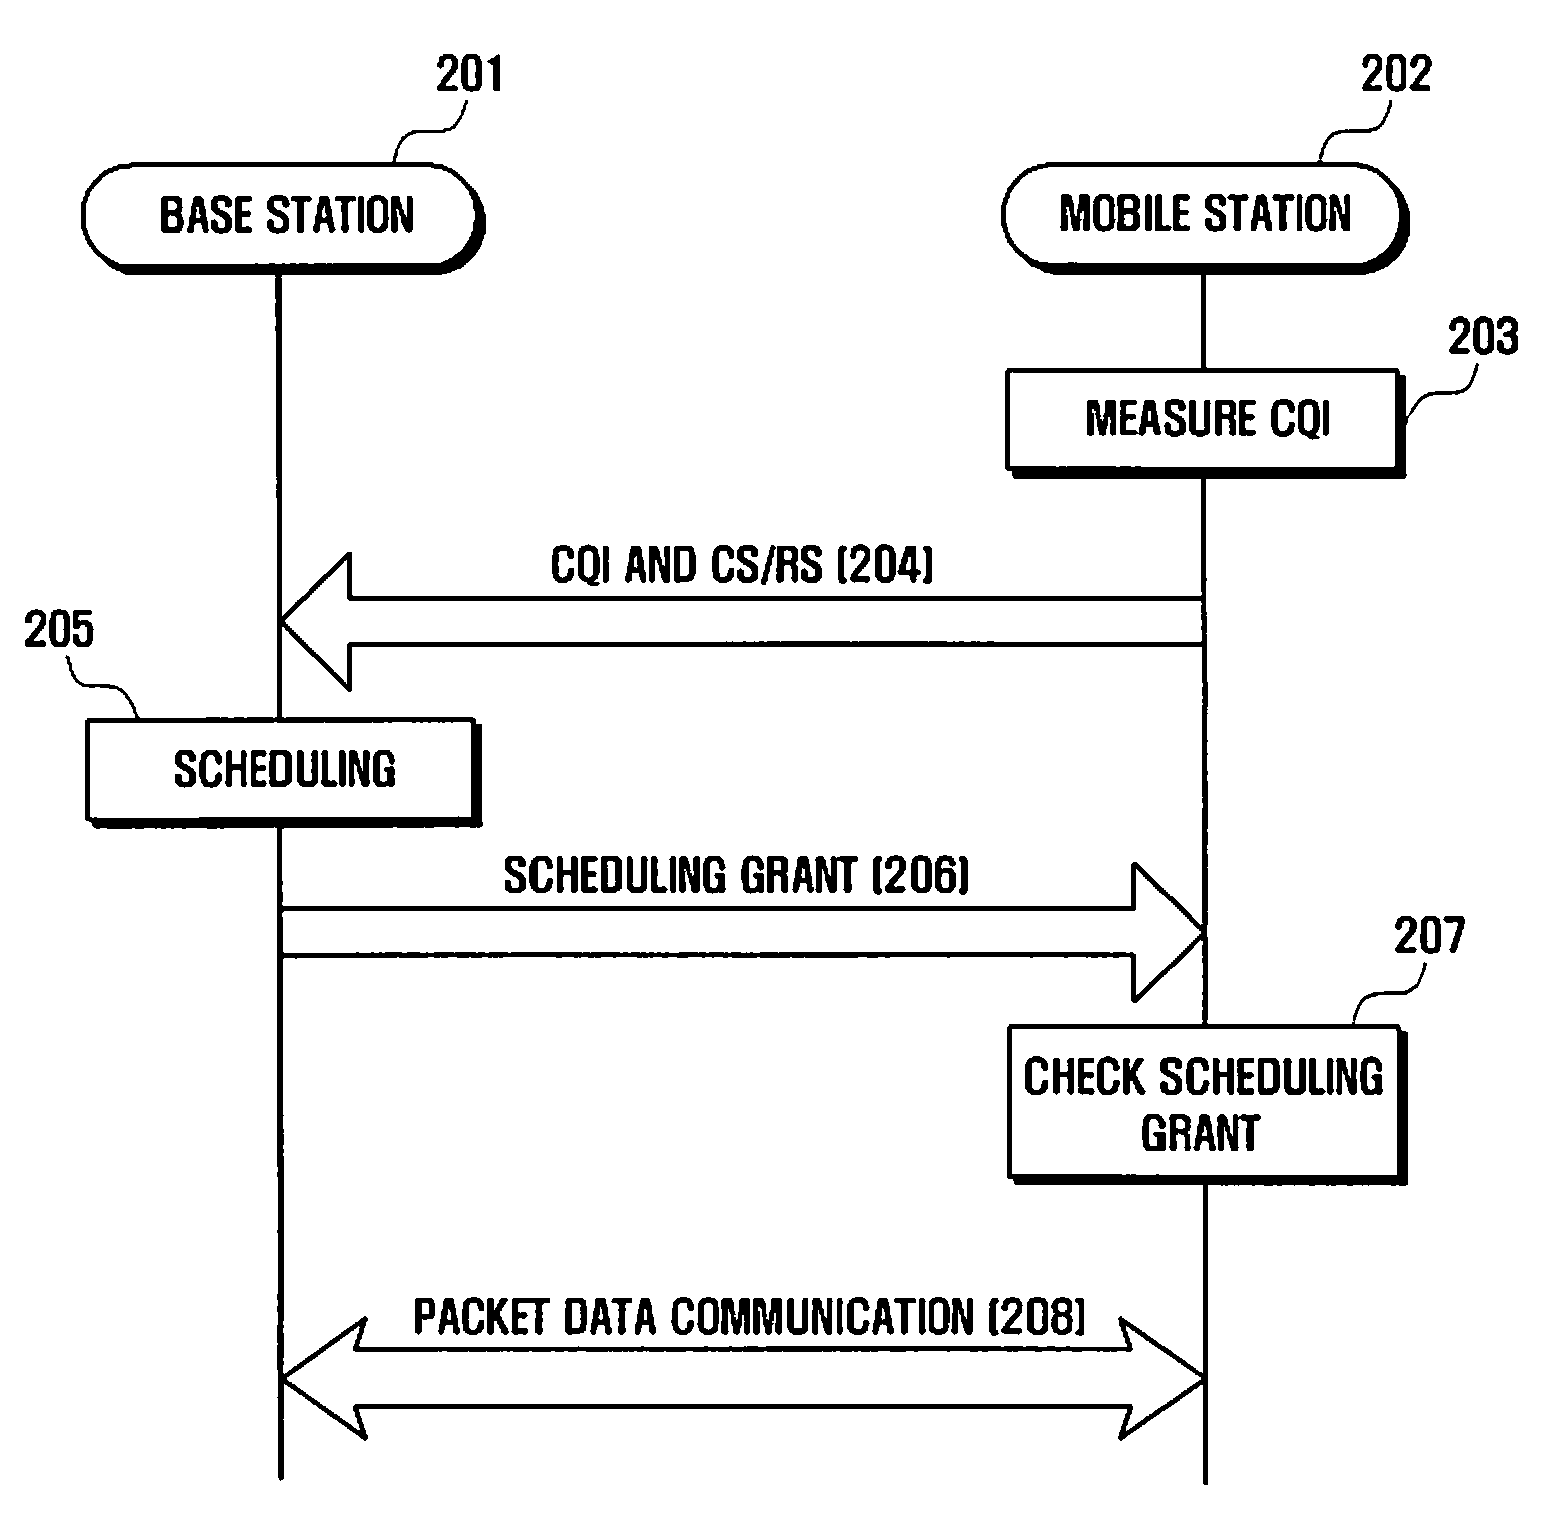 Control channel element detection method using cqi in a wireless communication system